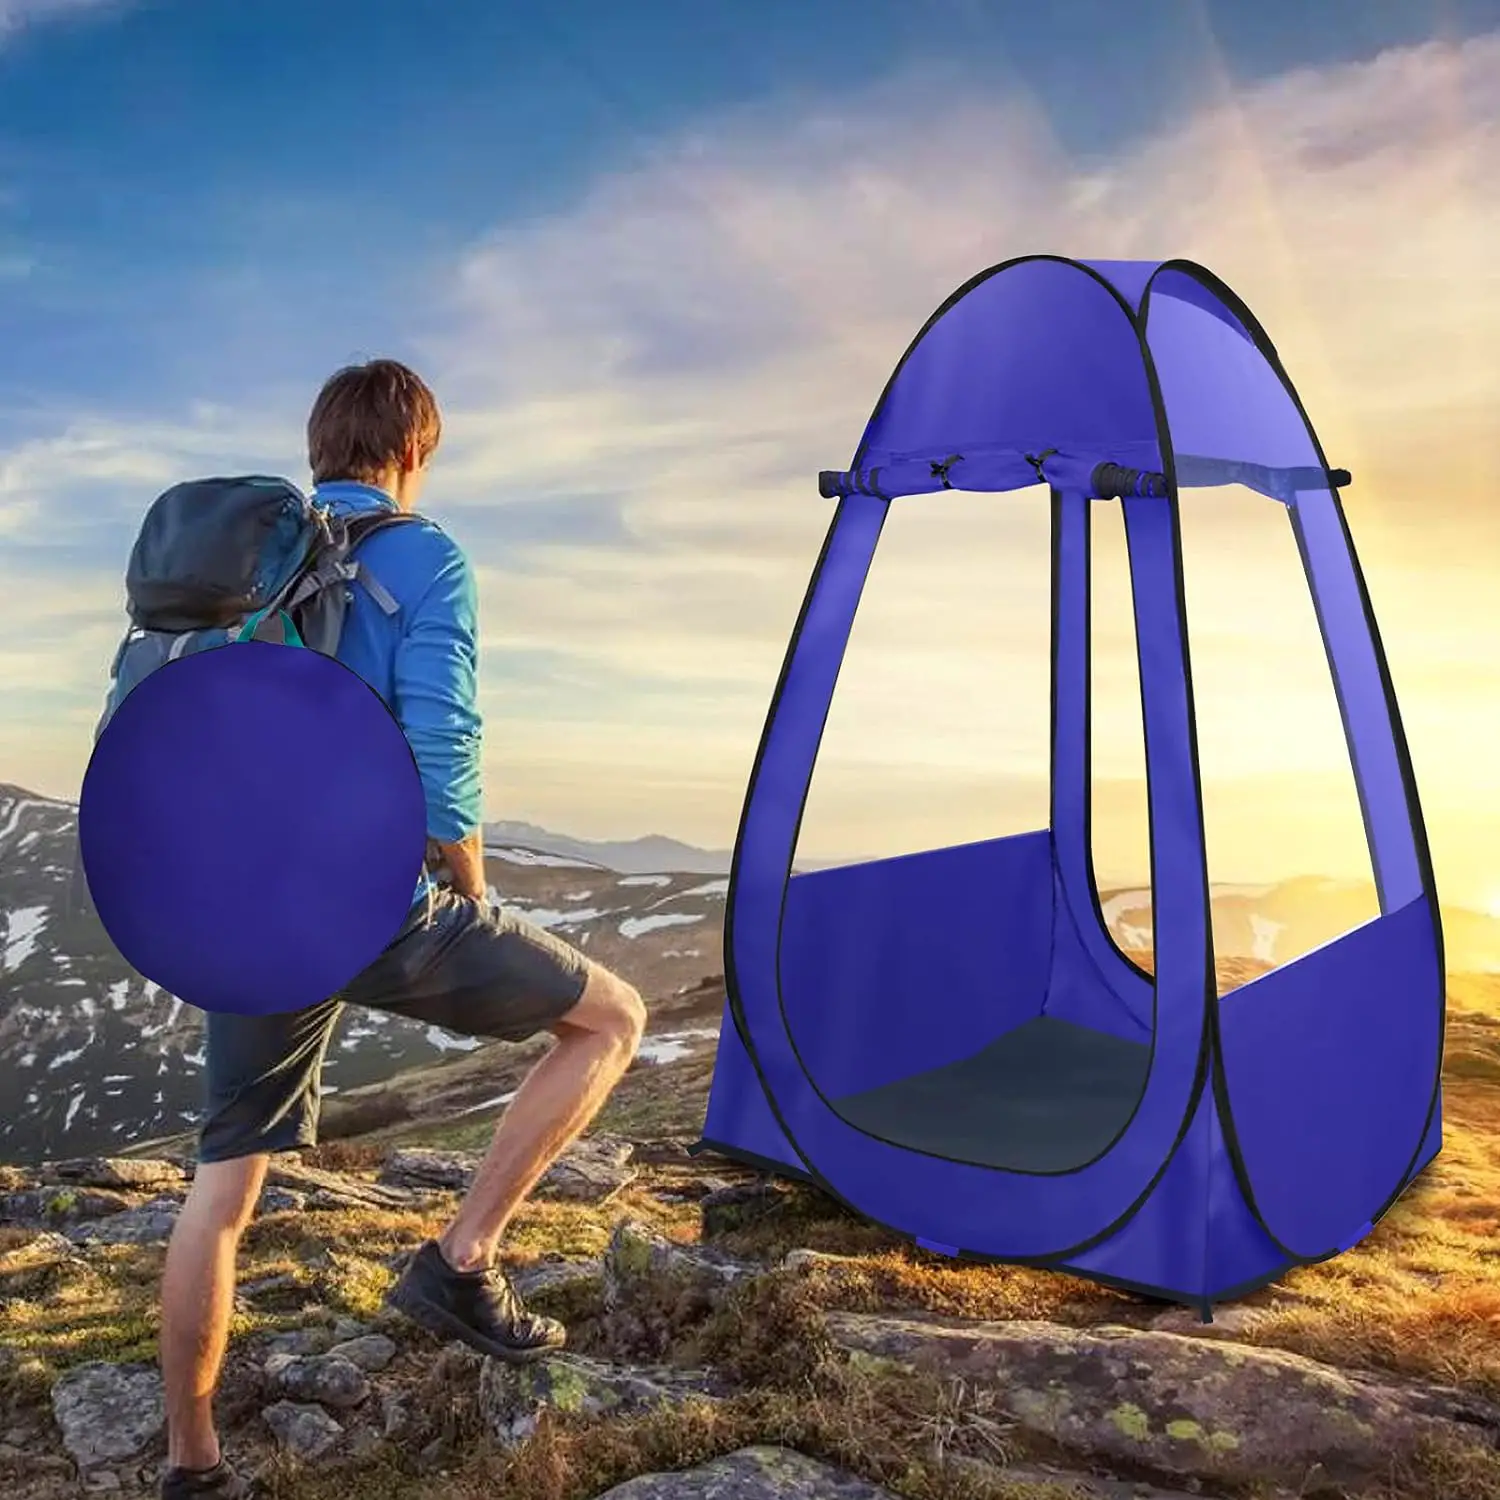 Single Pop Up Tent Pods Sports Fishing Review